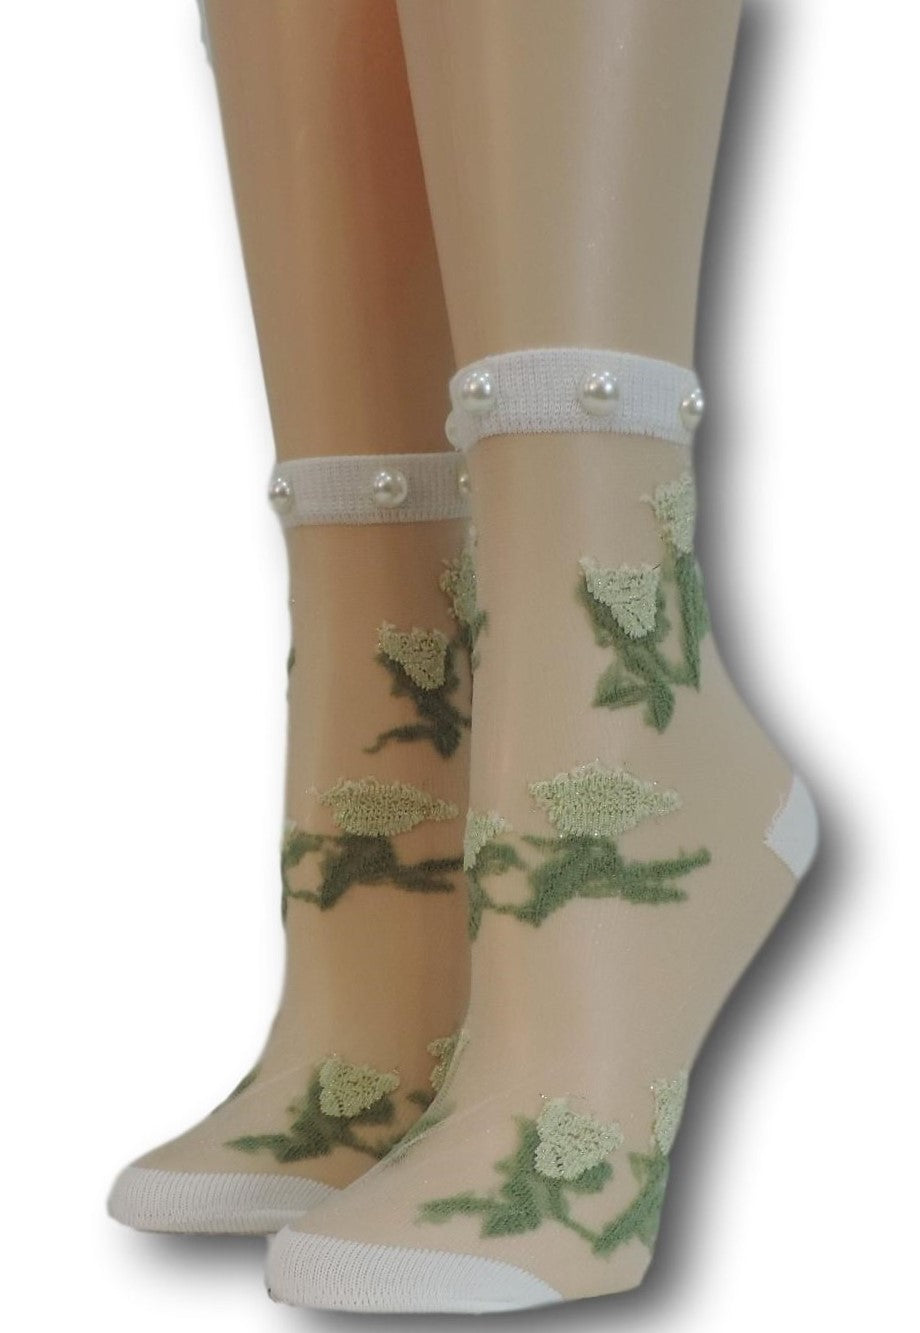 Nifty Green Flowers Sheer Socks with beads